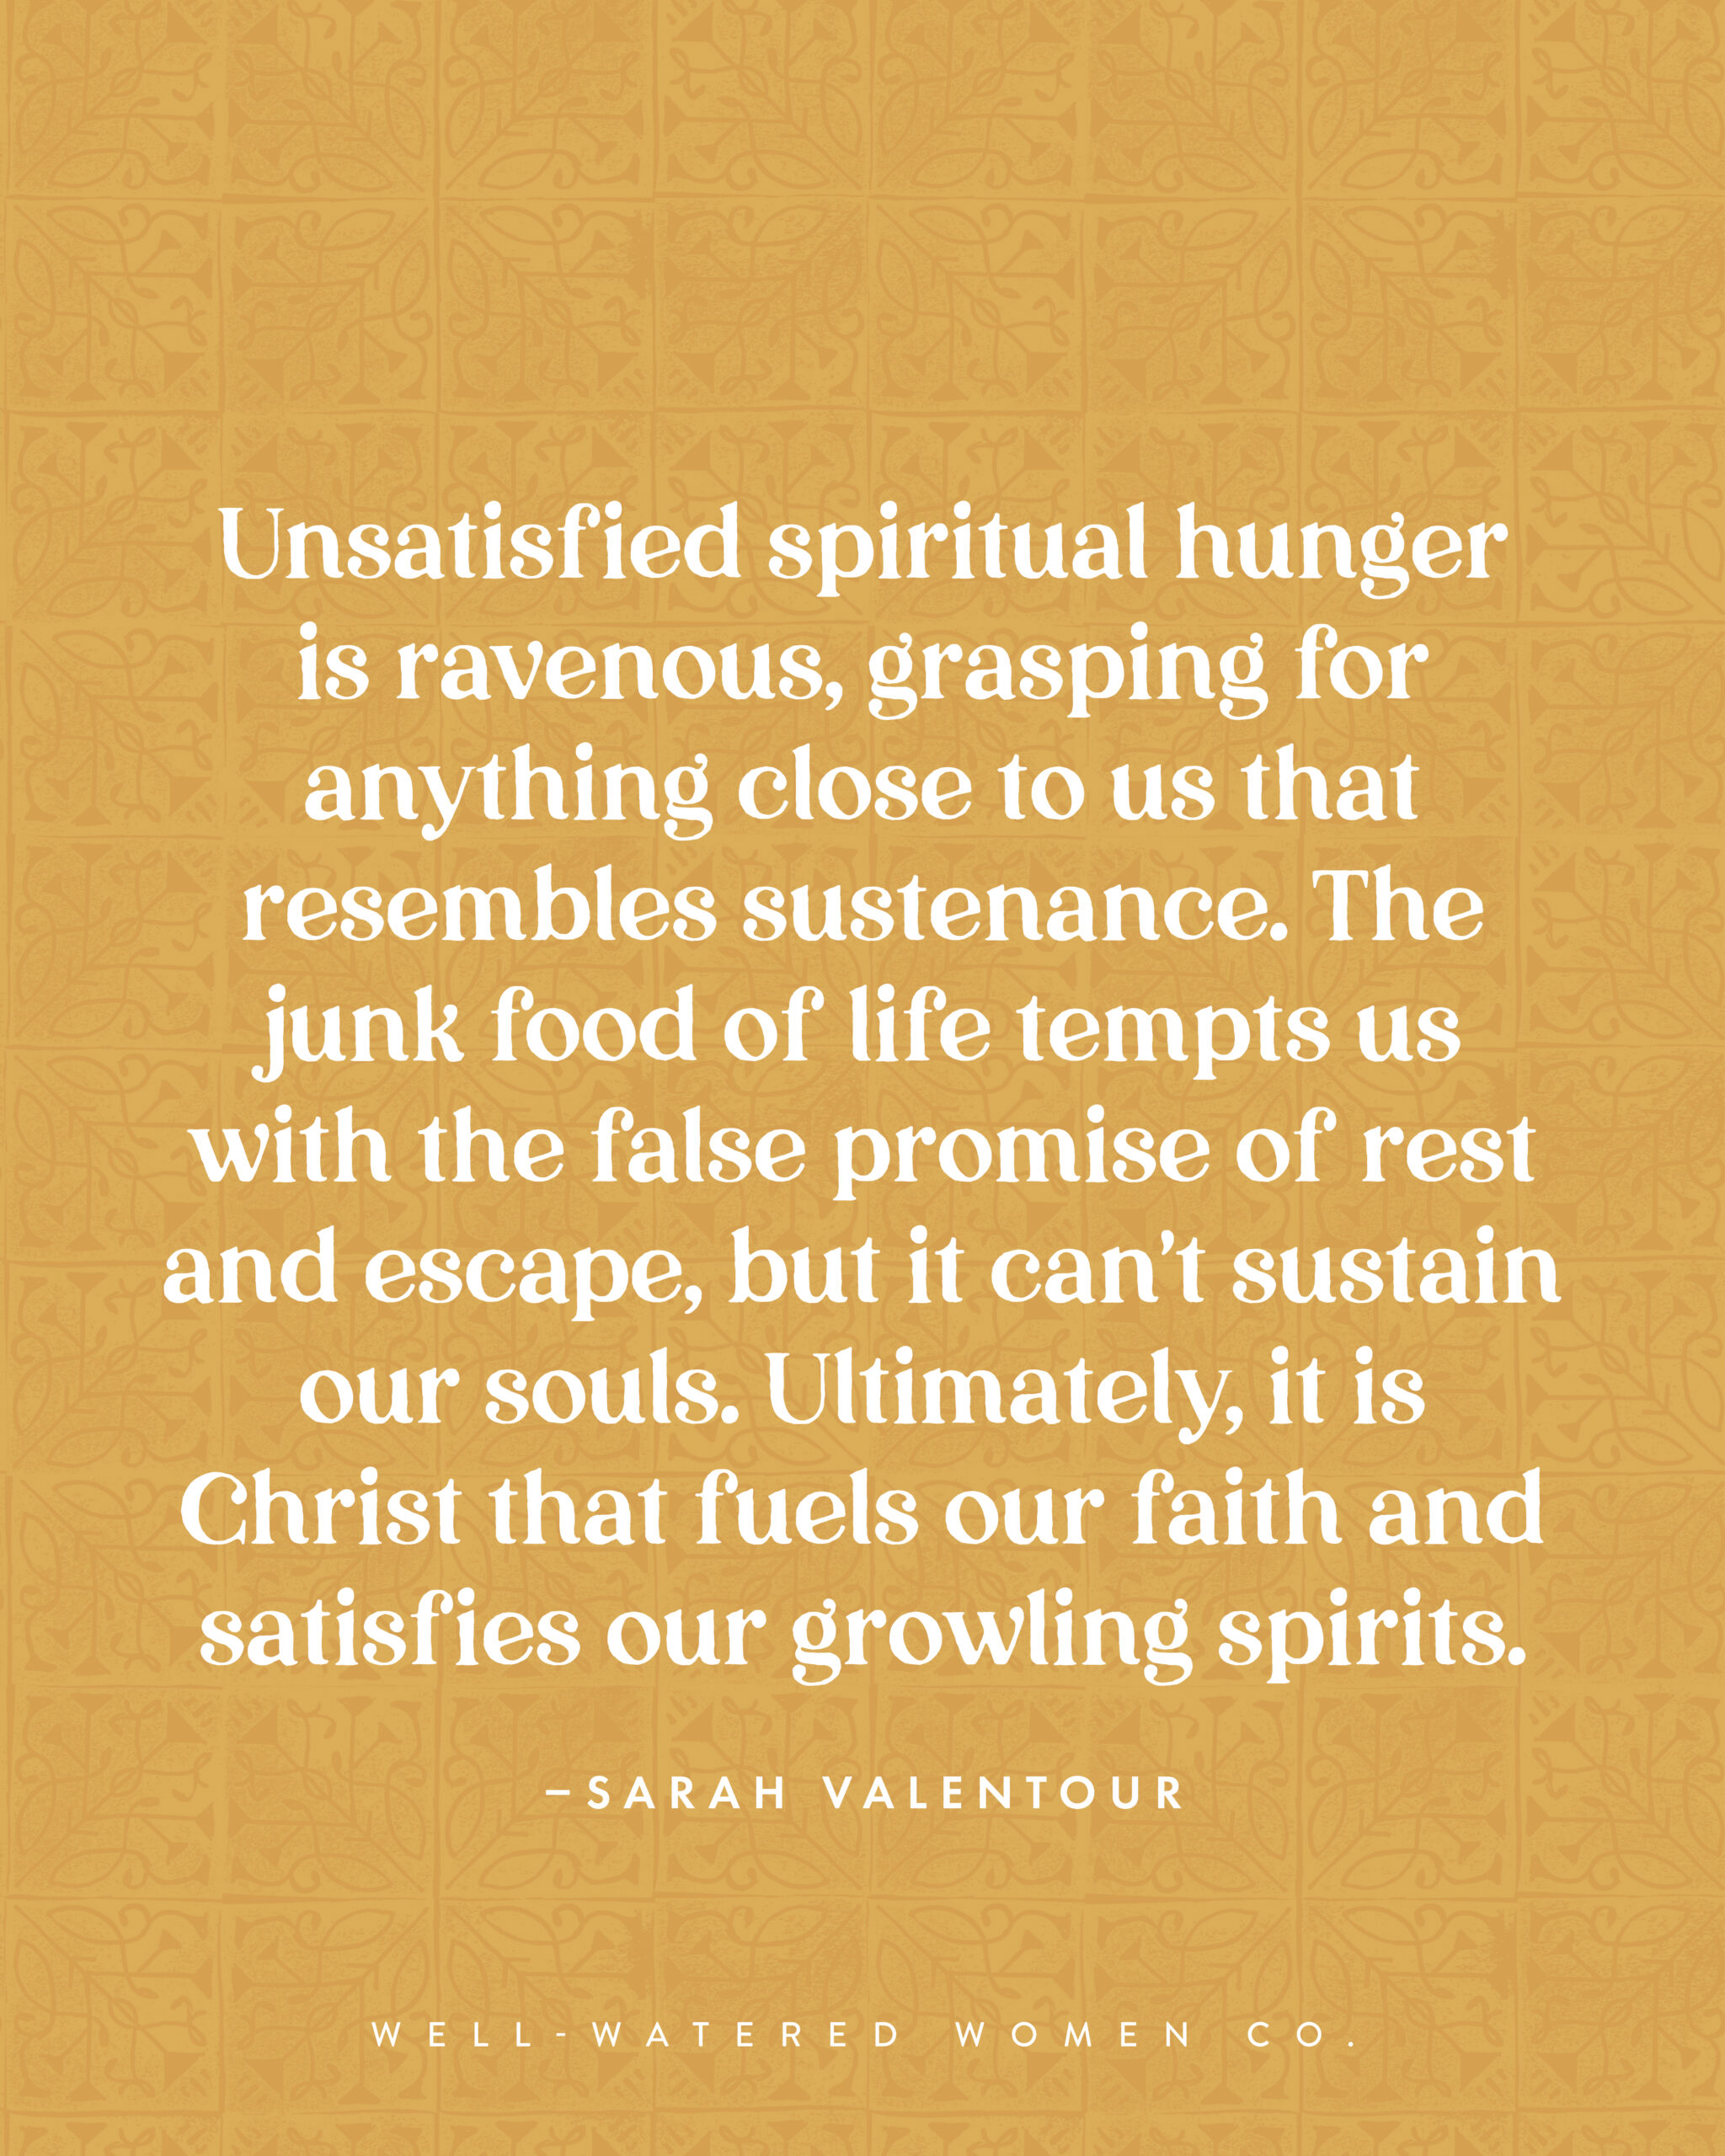 Don't Ignore the Signs of Spiritual Hunger - an article from Well-Watered Women - quote